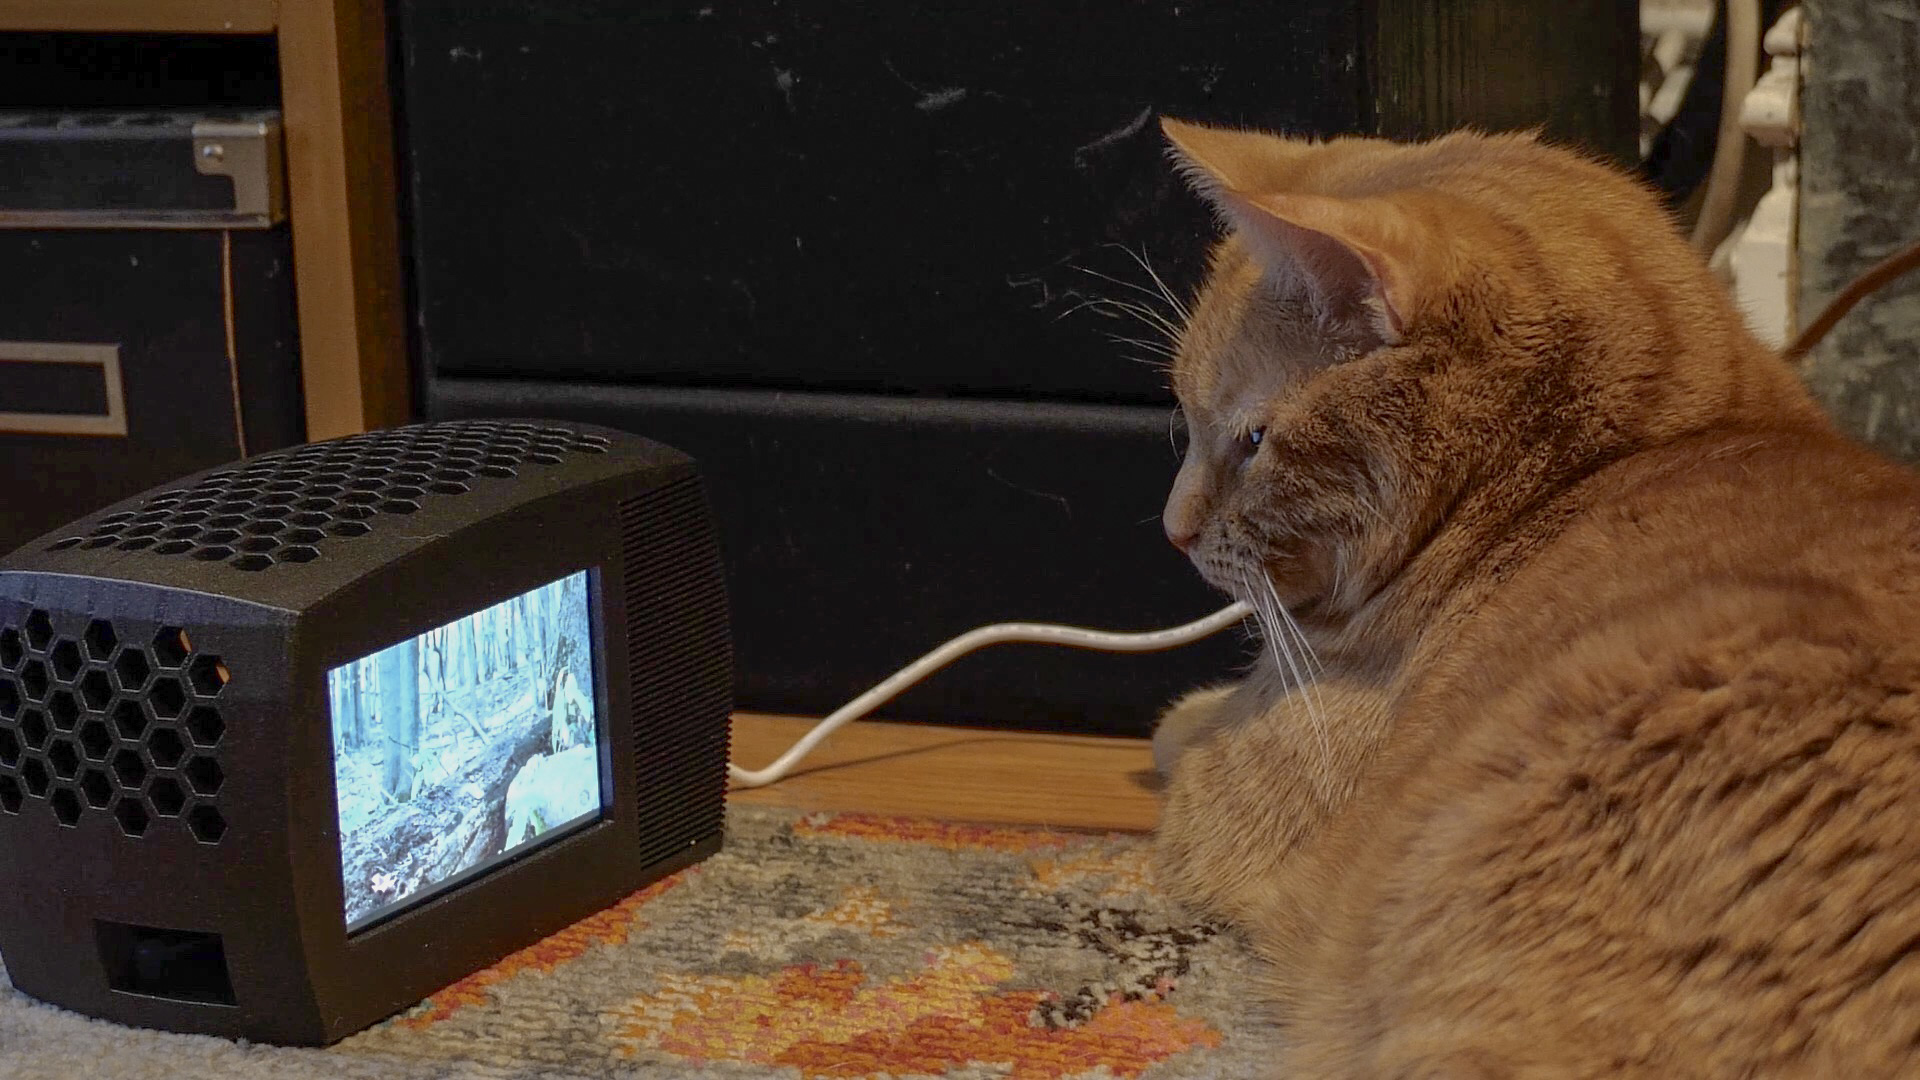 Make A Tiny TV For Your Cat Because That’s Awesome